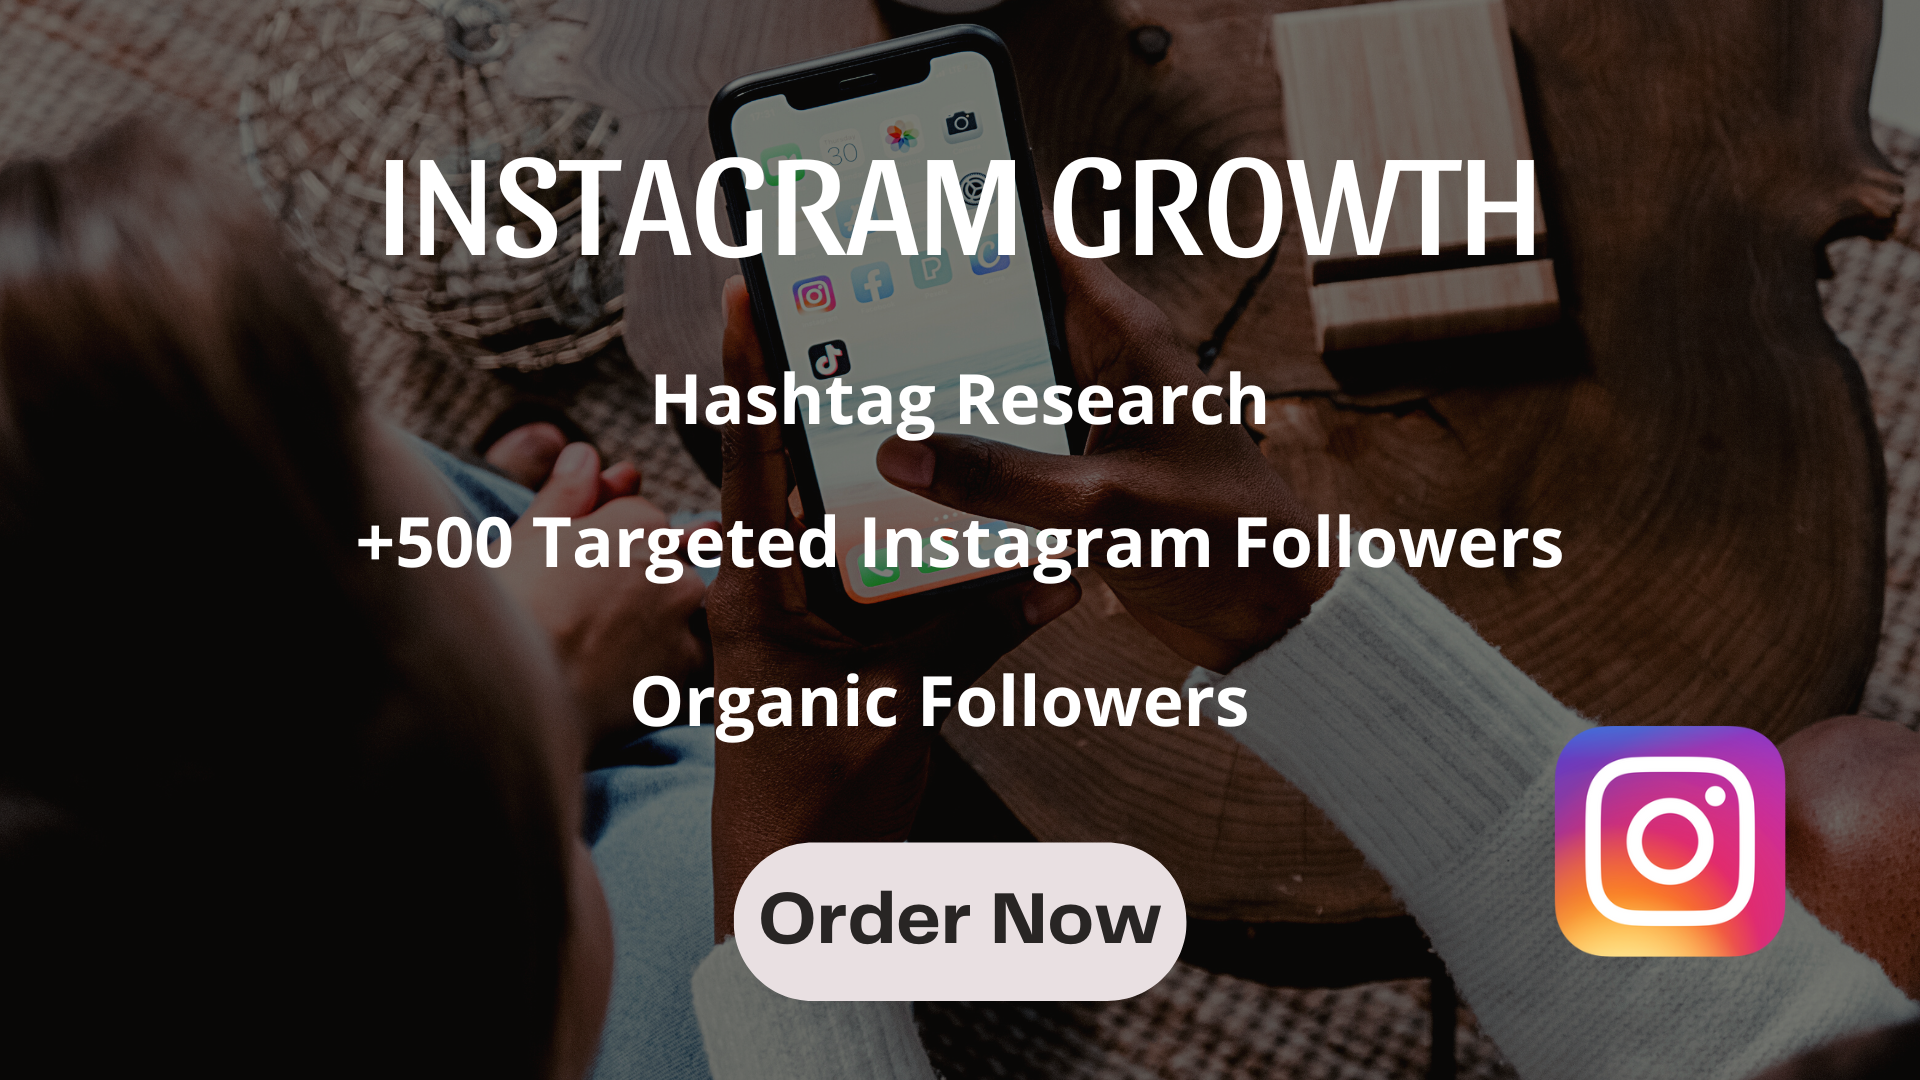 Professional Organic Growth And Social Media Management